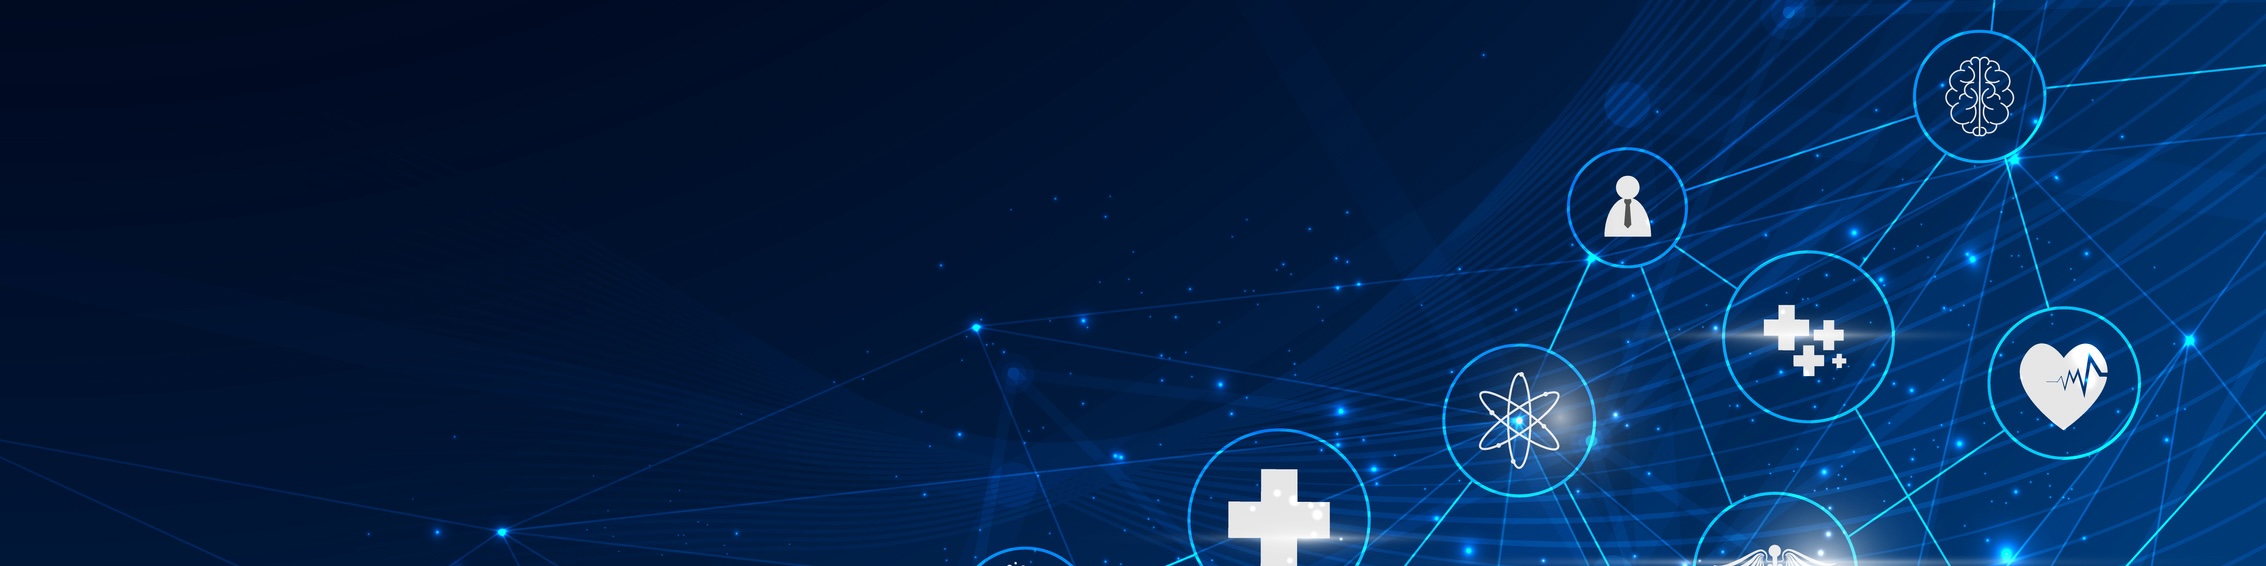 health care icon pattern medical innovation concept background design